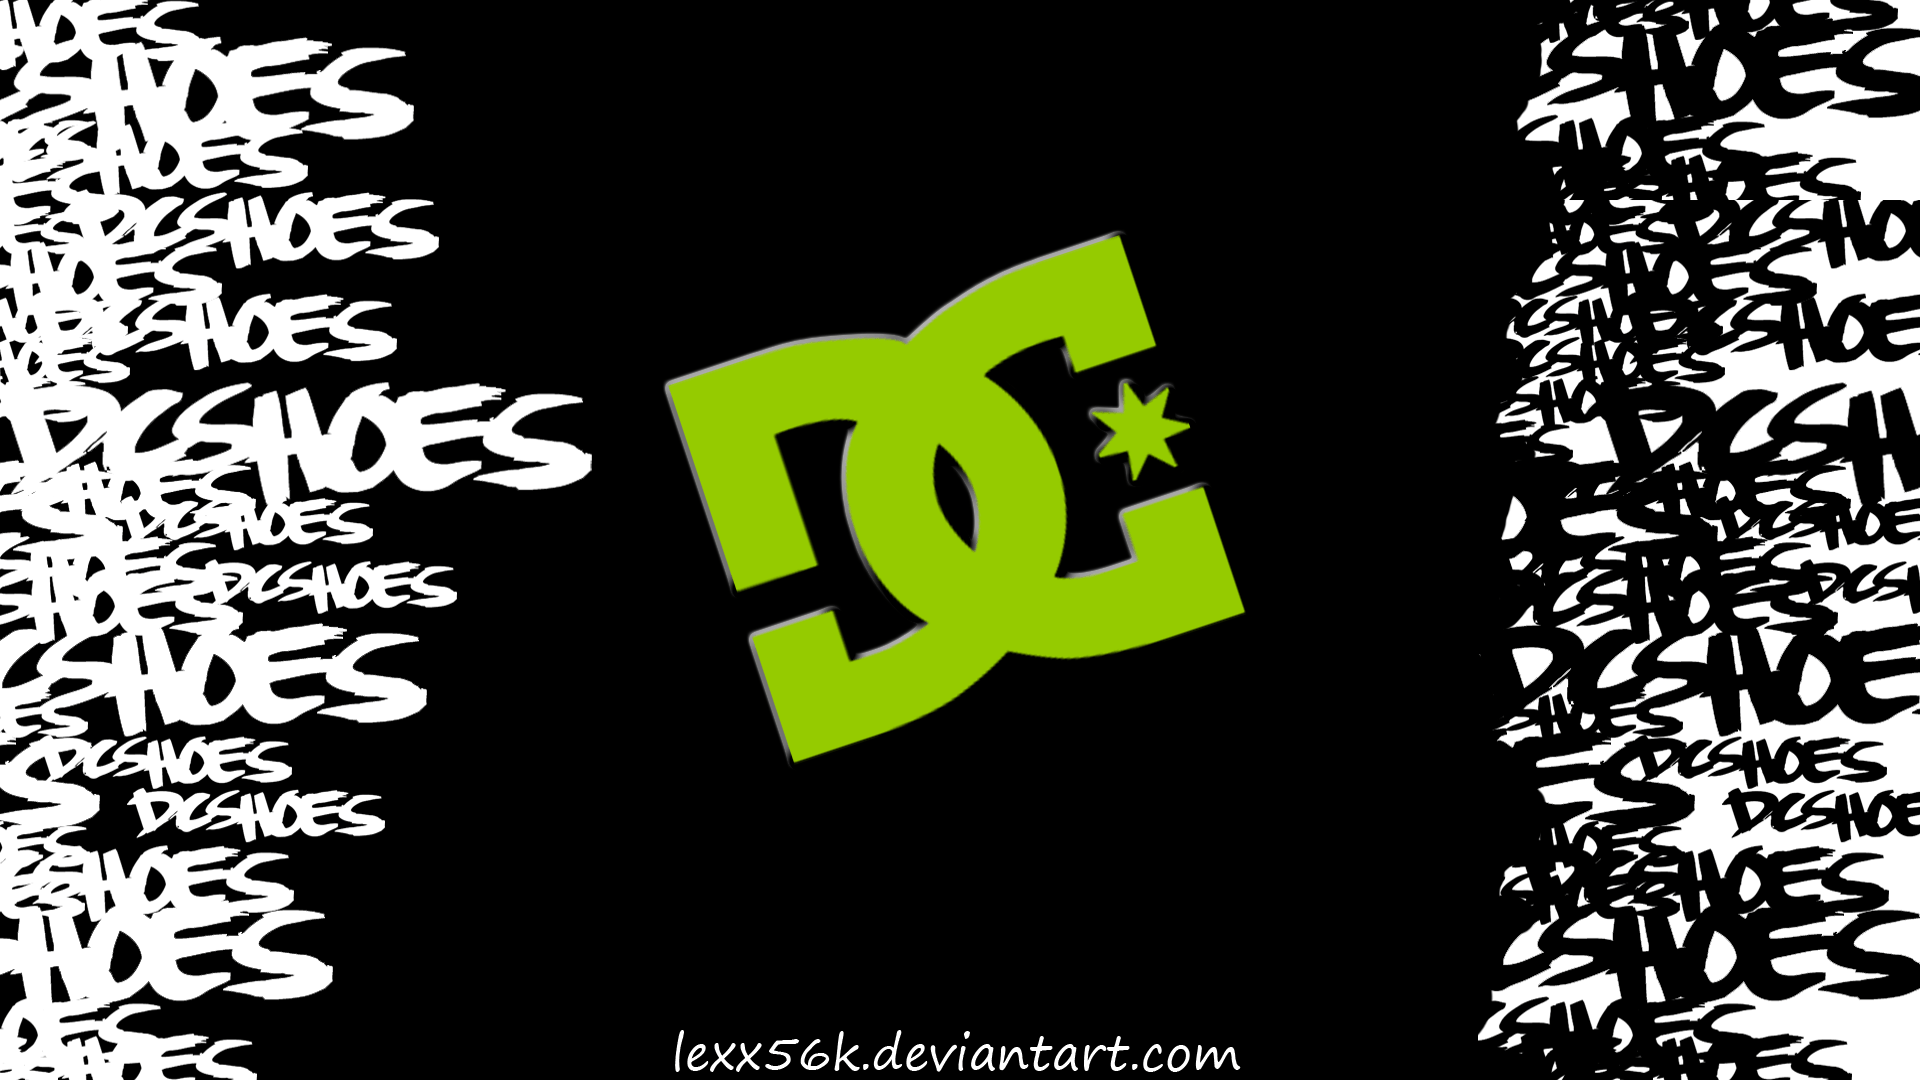 DC Shoes Wallpapers - Wallpaper Cave